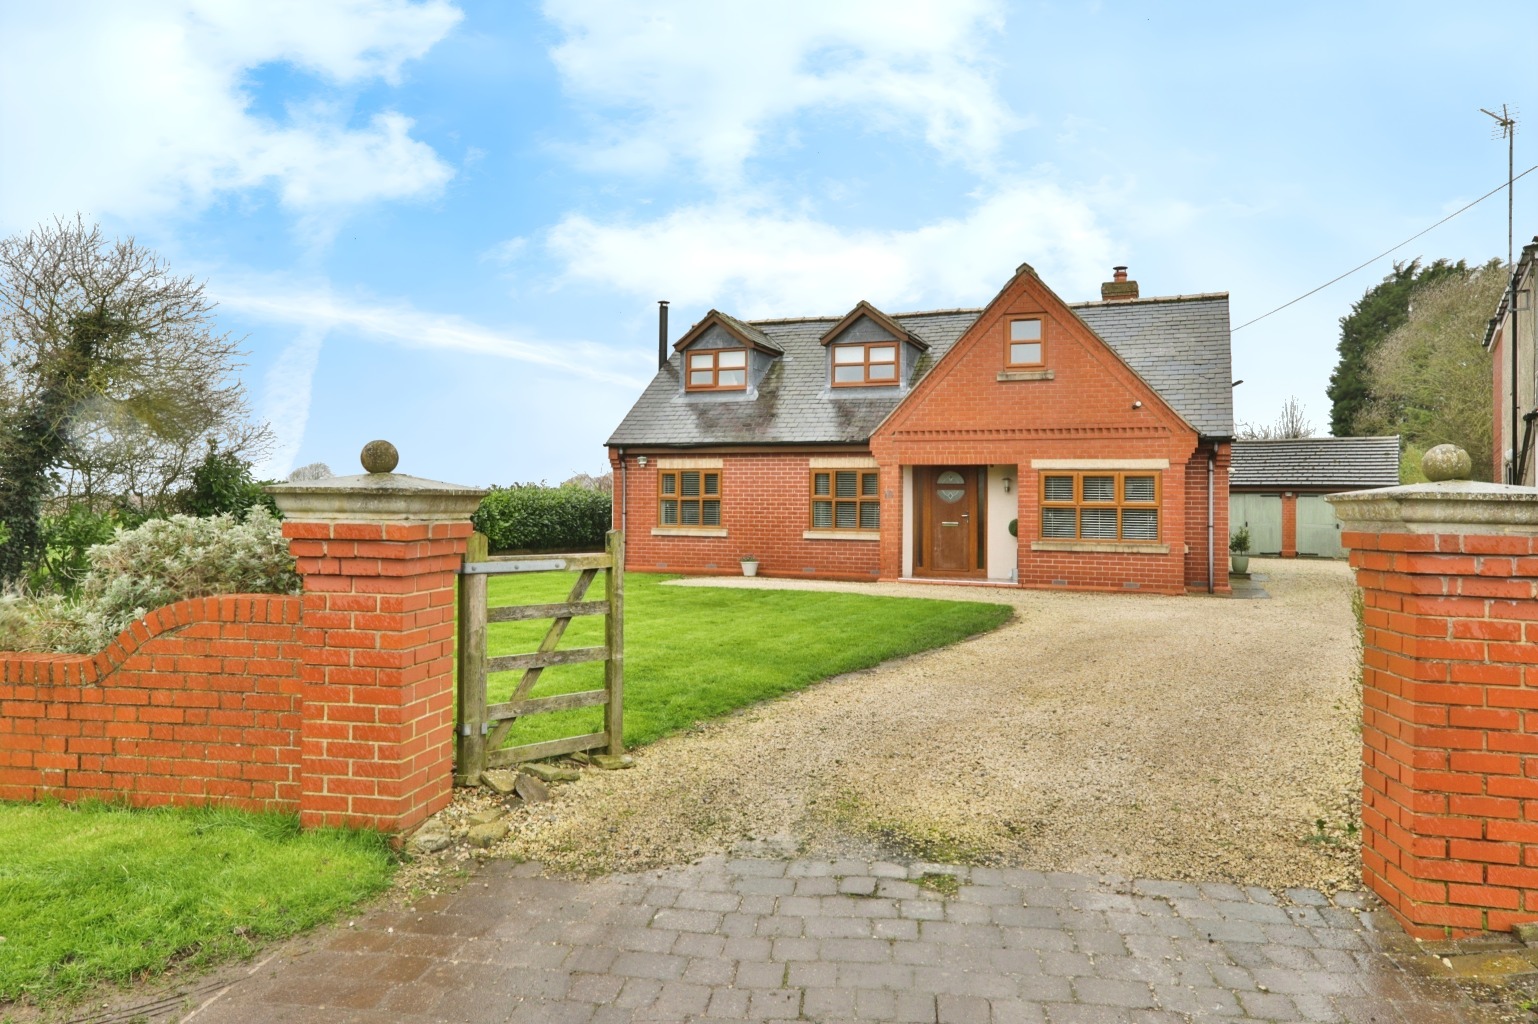 4 bed detached house for sale in Low Farm Road, Hull - Property Image 1